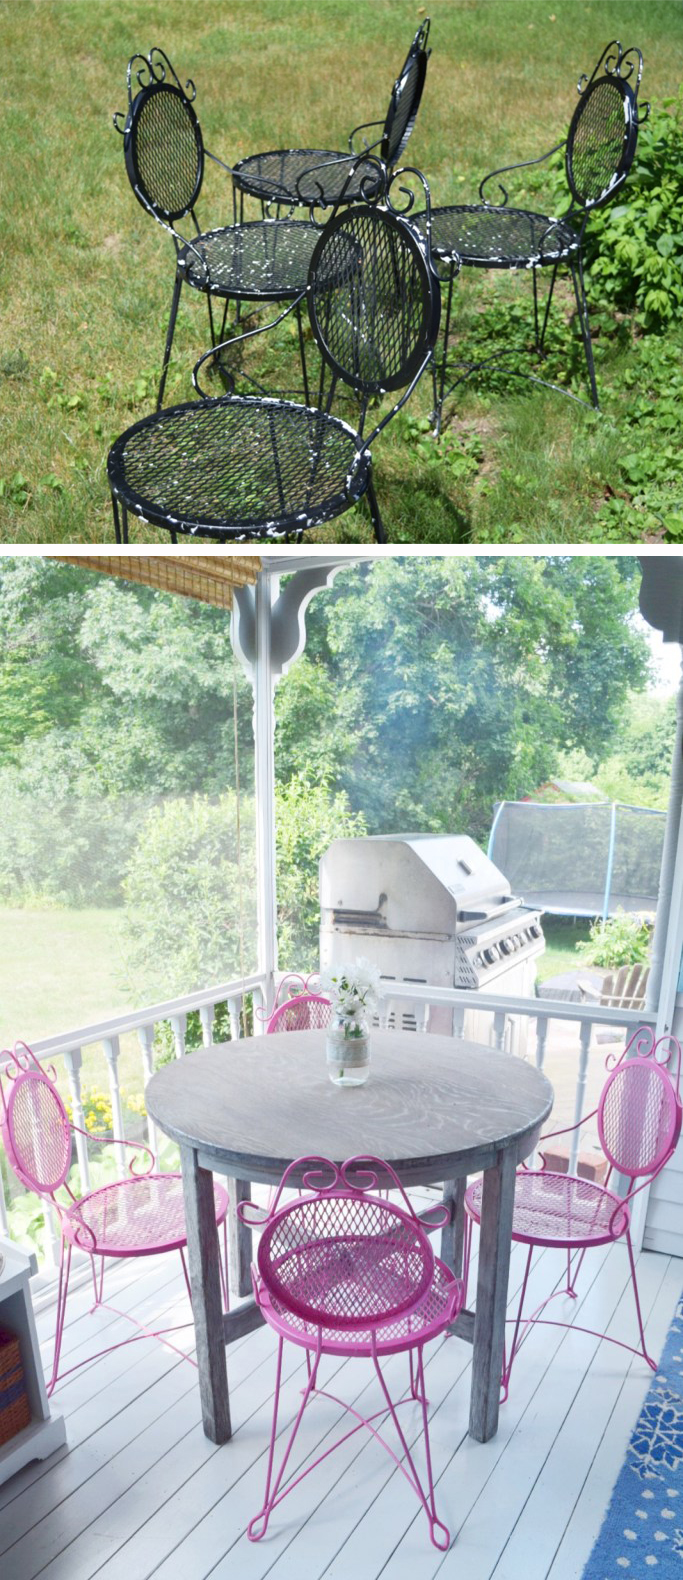 Outdoor furniture makeover using spray paint